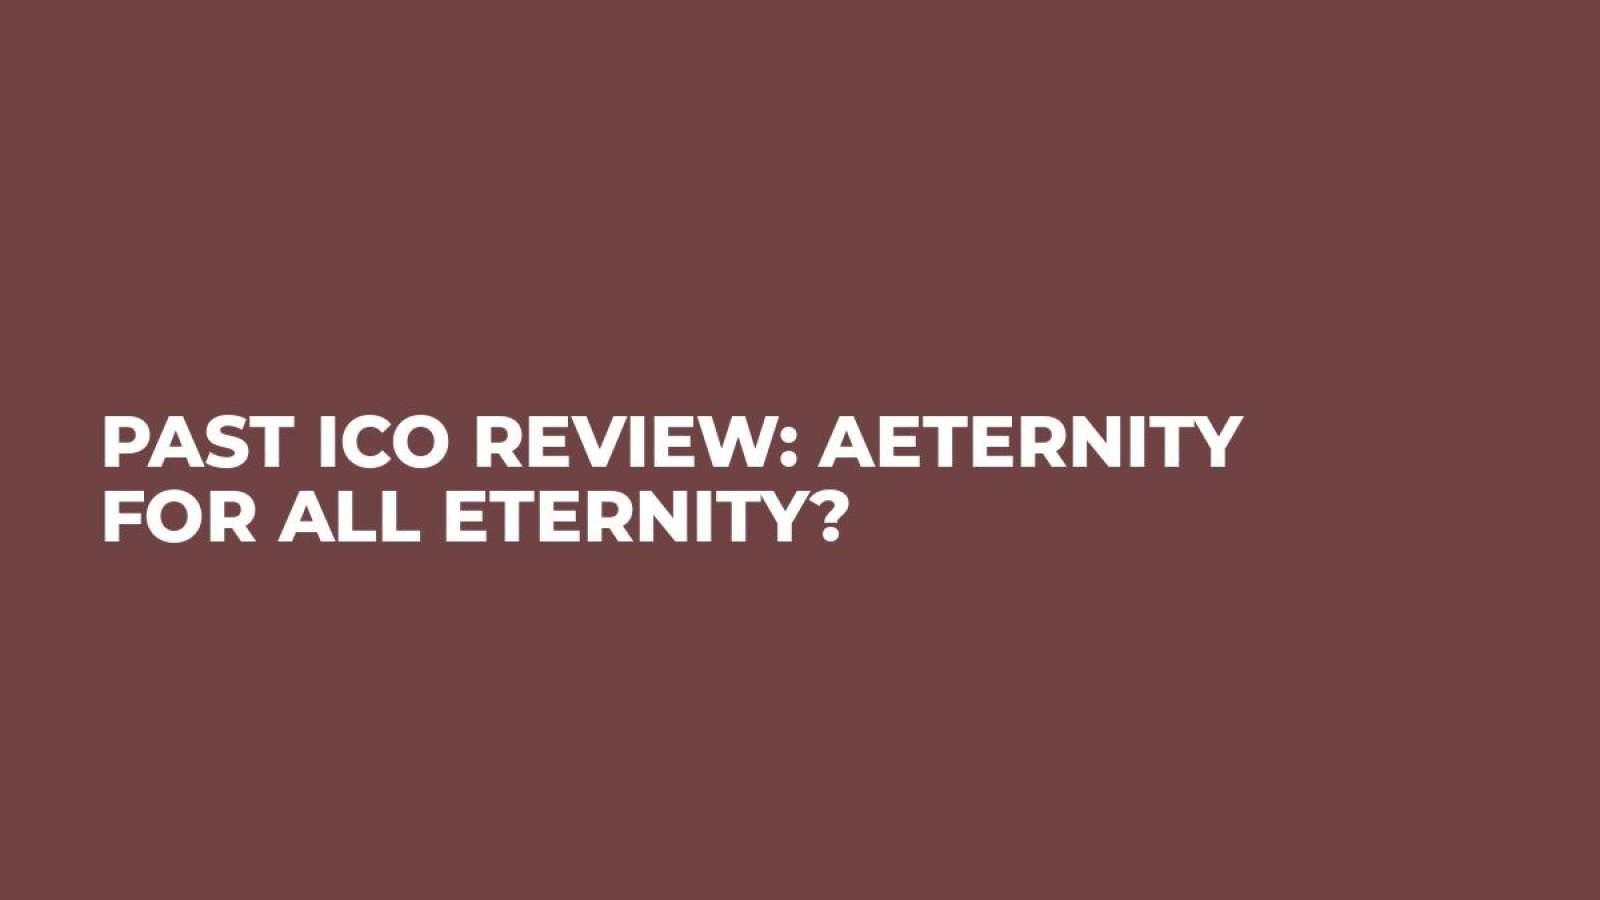 Past ICO Review: Aeternity For All Eternity?